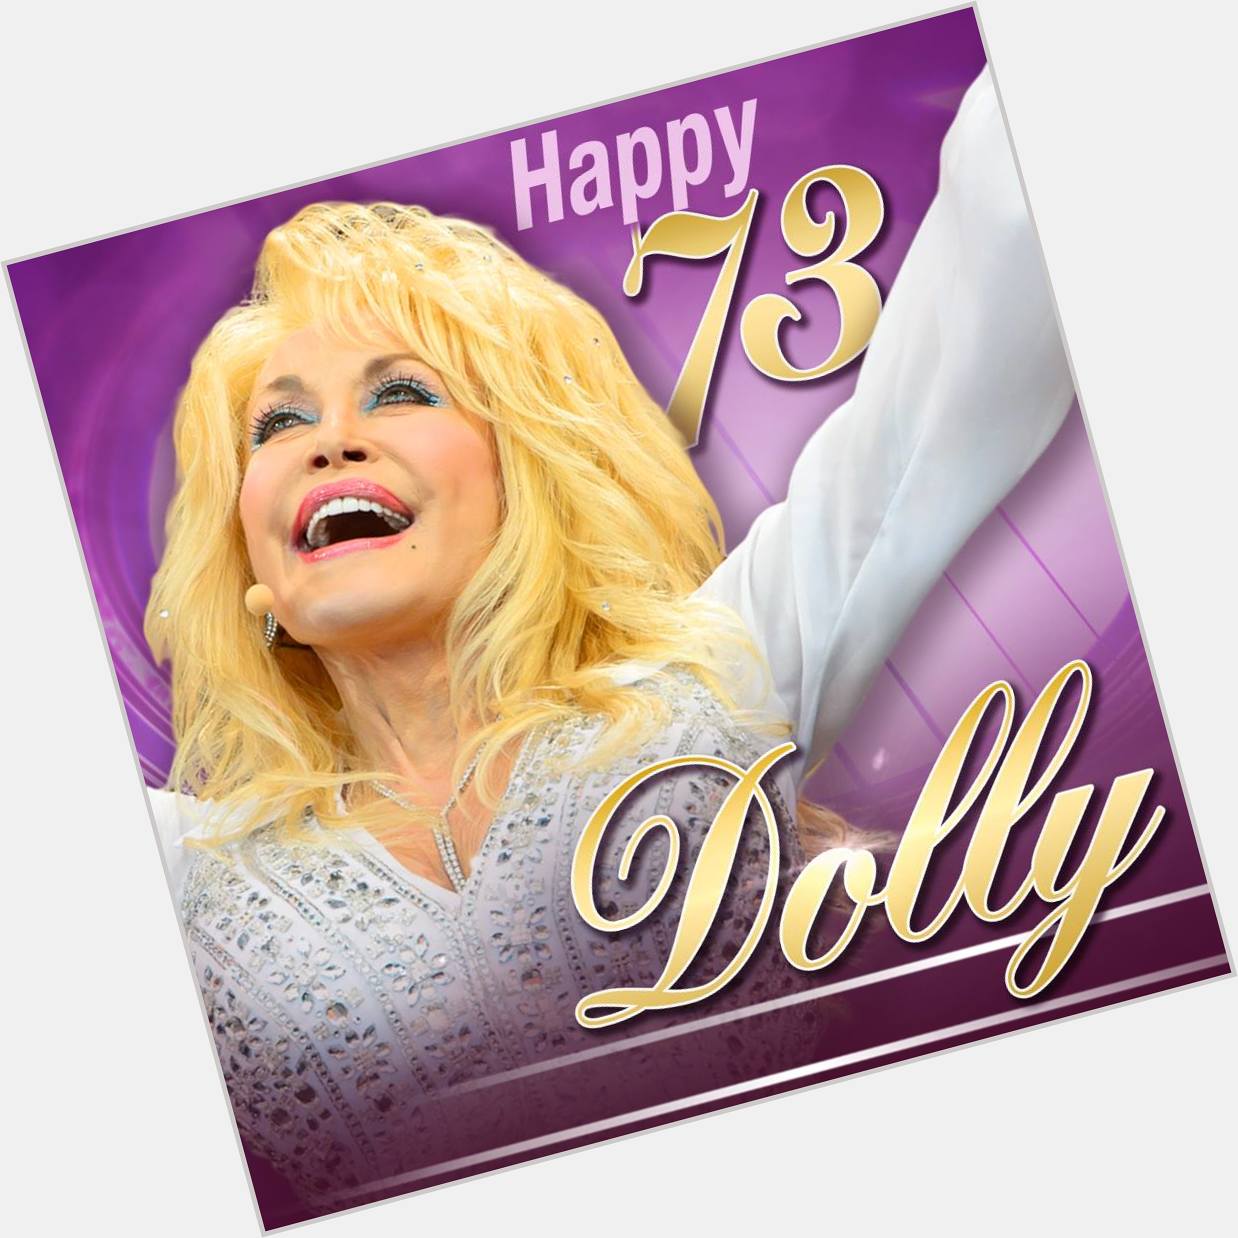 HAPPY BIRTHDAY! Join us in wishing Dolly Parton a happy birthday. The singer turns 73 today.  